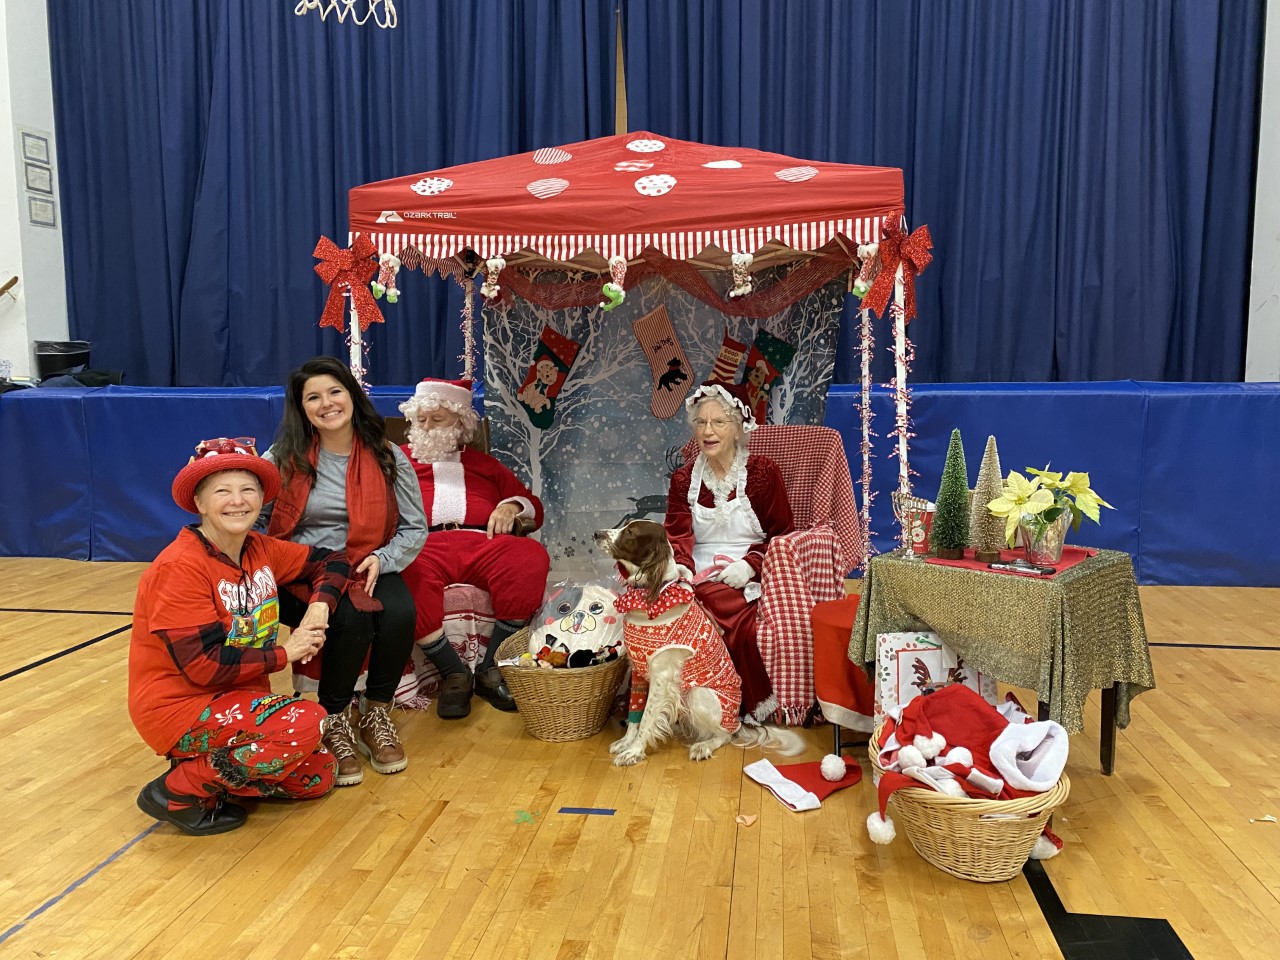 A very special THANK YOU to these amazing people for making it possible to have the amazing Holiday you gave the students and staff at the GWS. Mr. Jim Craig, Mrs. Deanna Graig, Ms. Ginny LePor, Ms. Sharon Leon, Ms. Eva Rodriguez, Ms. Linda Greene and Ms. Ciatlyn Yerves.